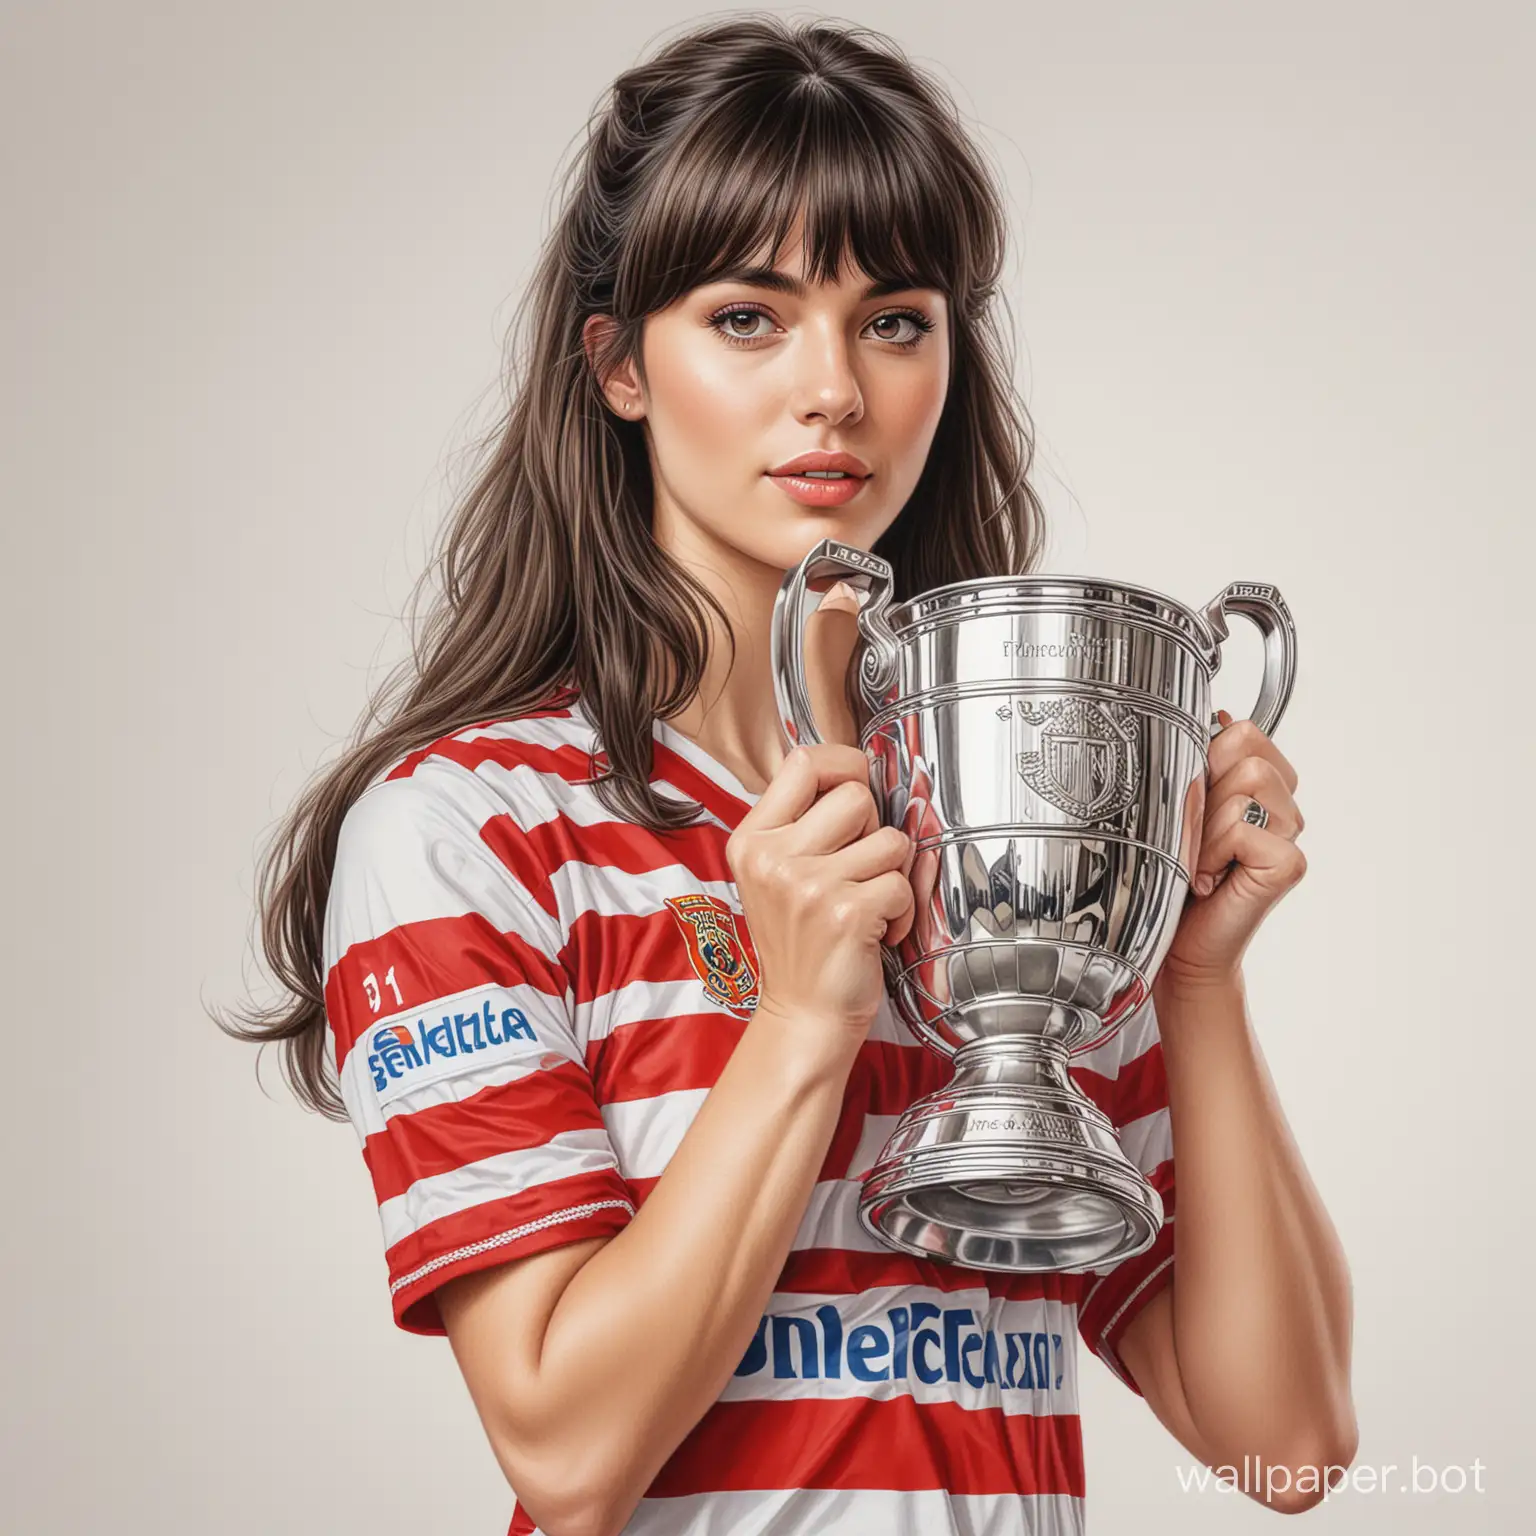 Realistic-Drawing-of-Stefania-25YearOld-with-Dark-Hair-Wearing-Red-and-White-Striped-Soccer-Uniform-Holding-Champions-Cup